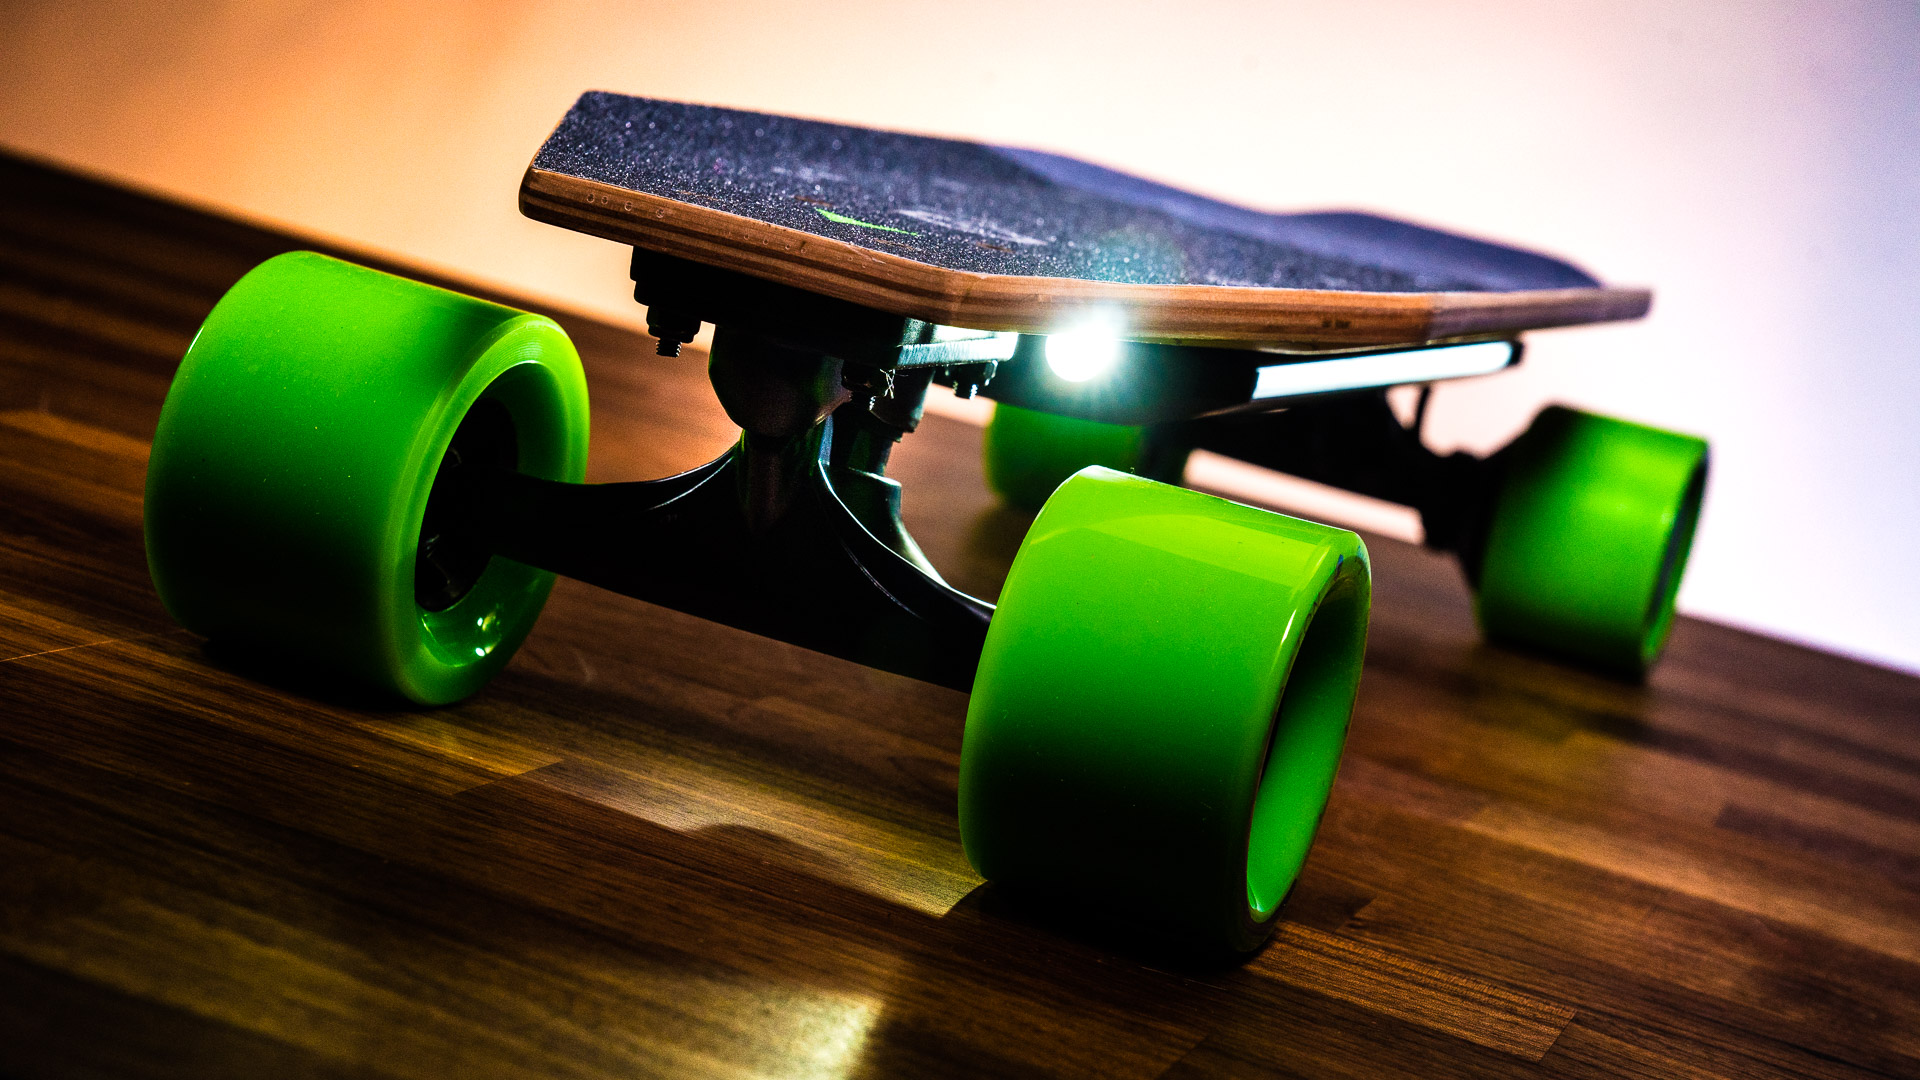 The BLINK electric skateboards combine portability with affordability, while still maintaining the smooth ride that cruising boards are known for. 